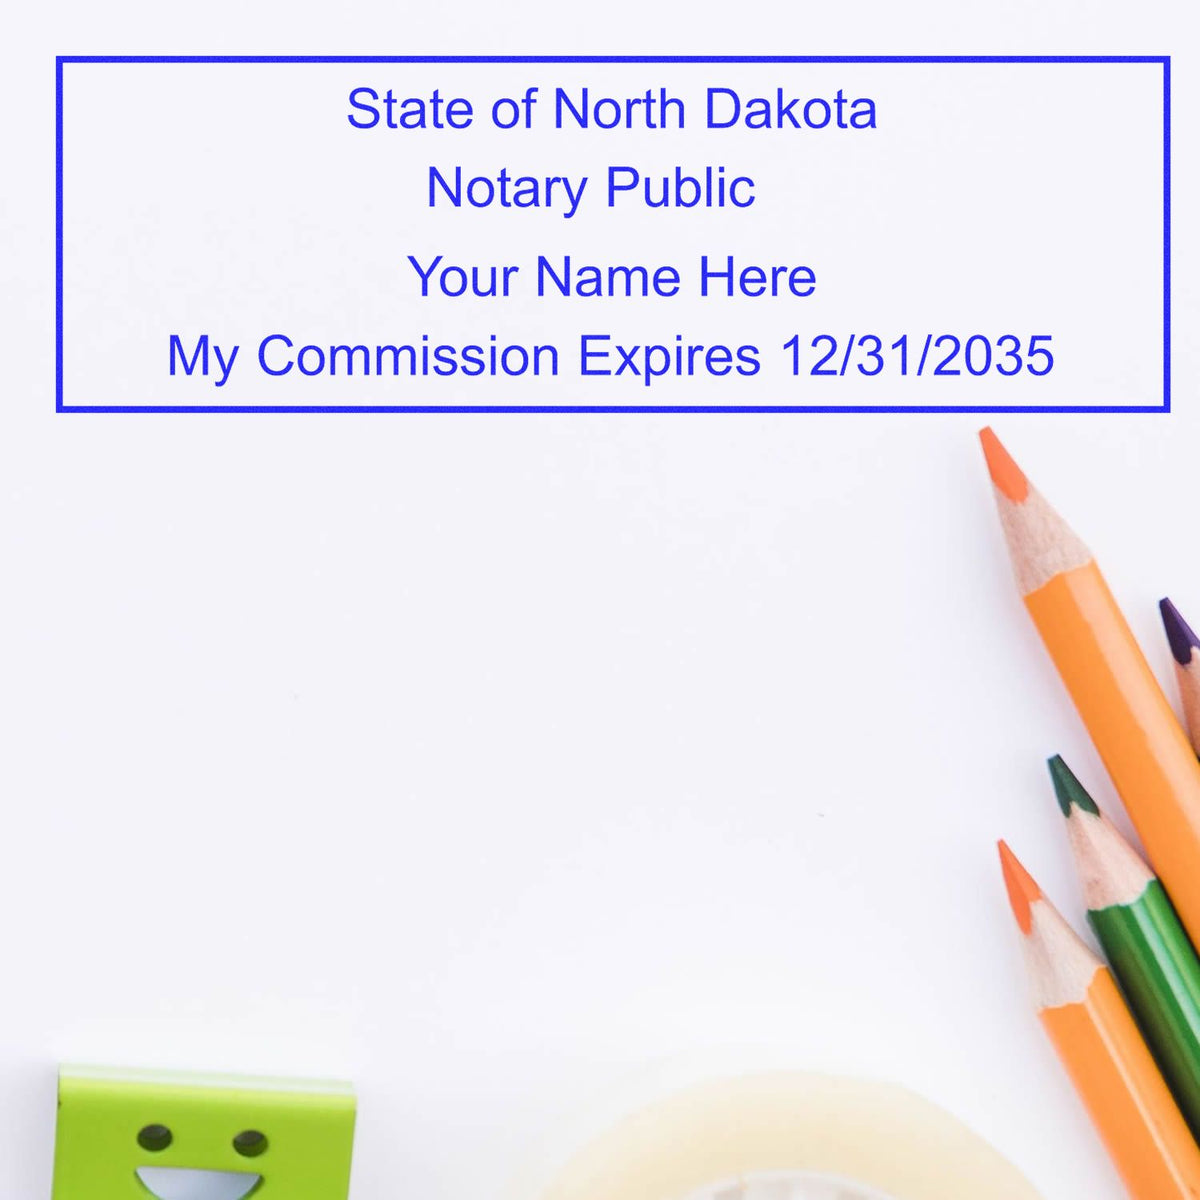 A lifestyle photo showing a stamped image of the Wooden Handle North Dakota Rectangular Notary Public Stamp on a piece of paper